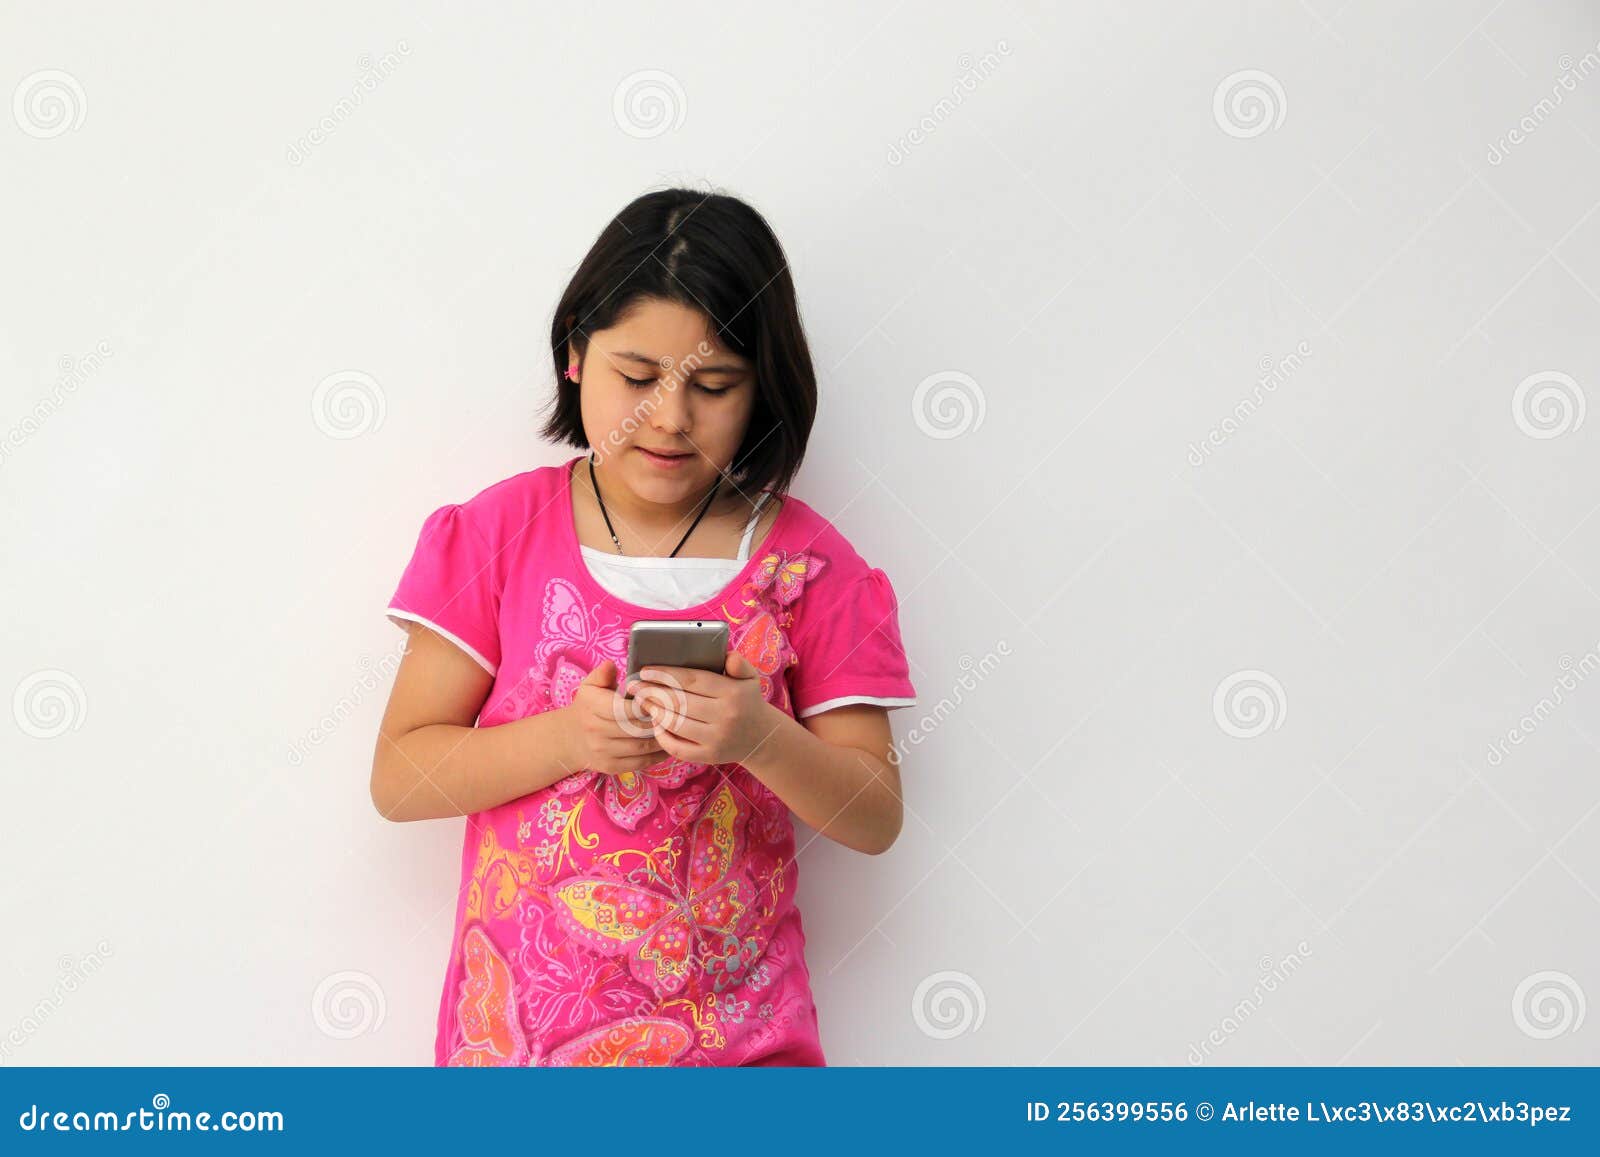 10 Year Old Hispanic Girl Uses Her Cell Phone To Make Video Calls Play Video Games Send